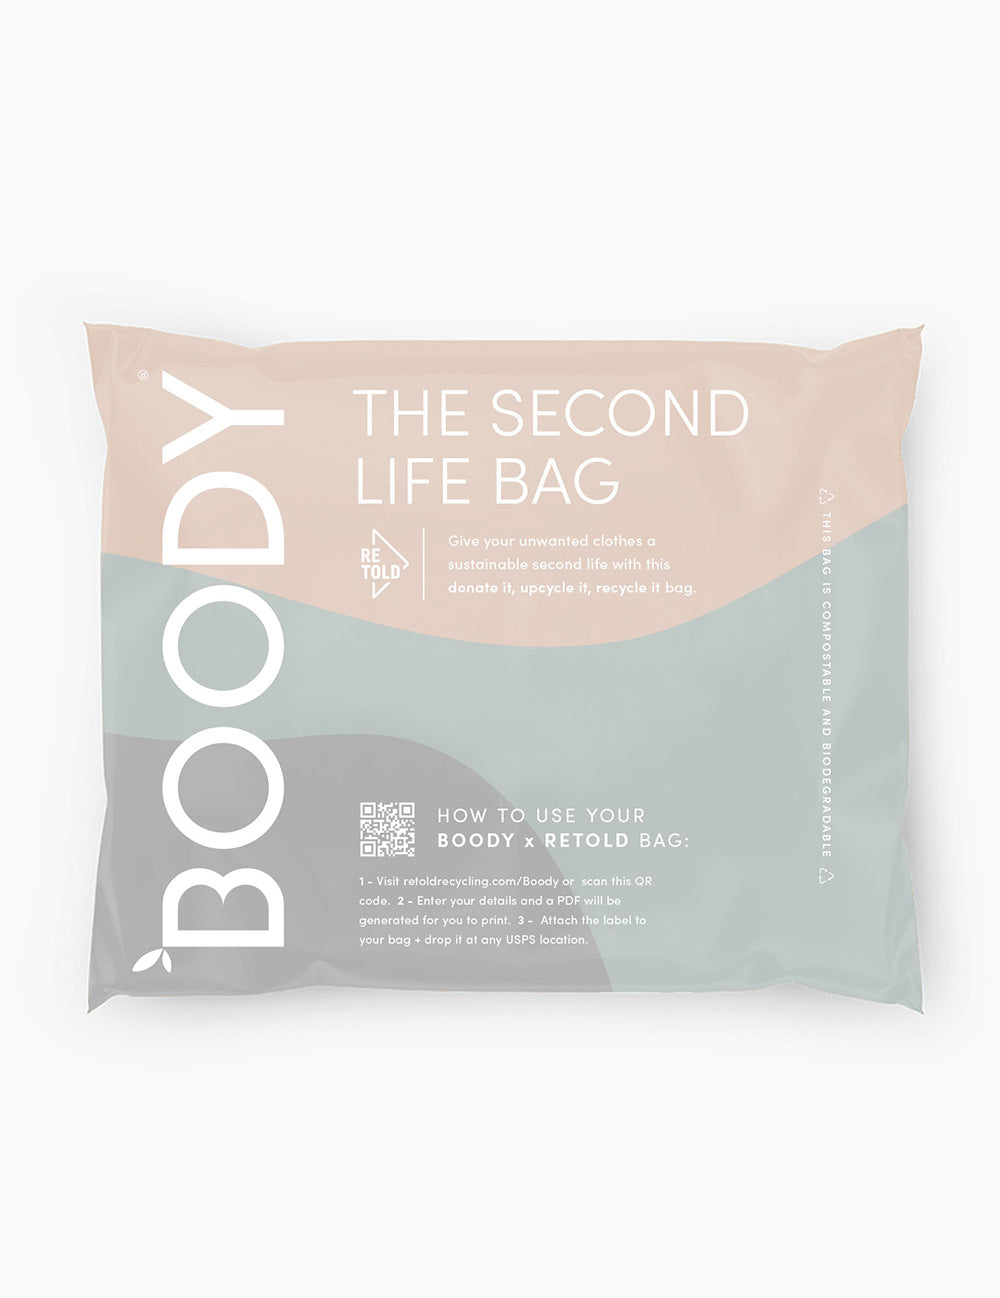 The Second Life Bag  Keep old clothes out of the landfill! – Boody USA